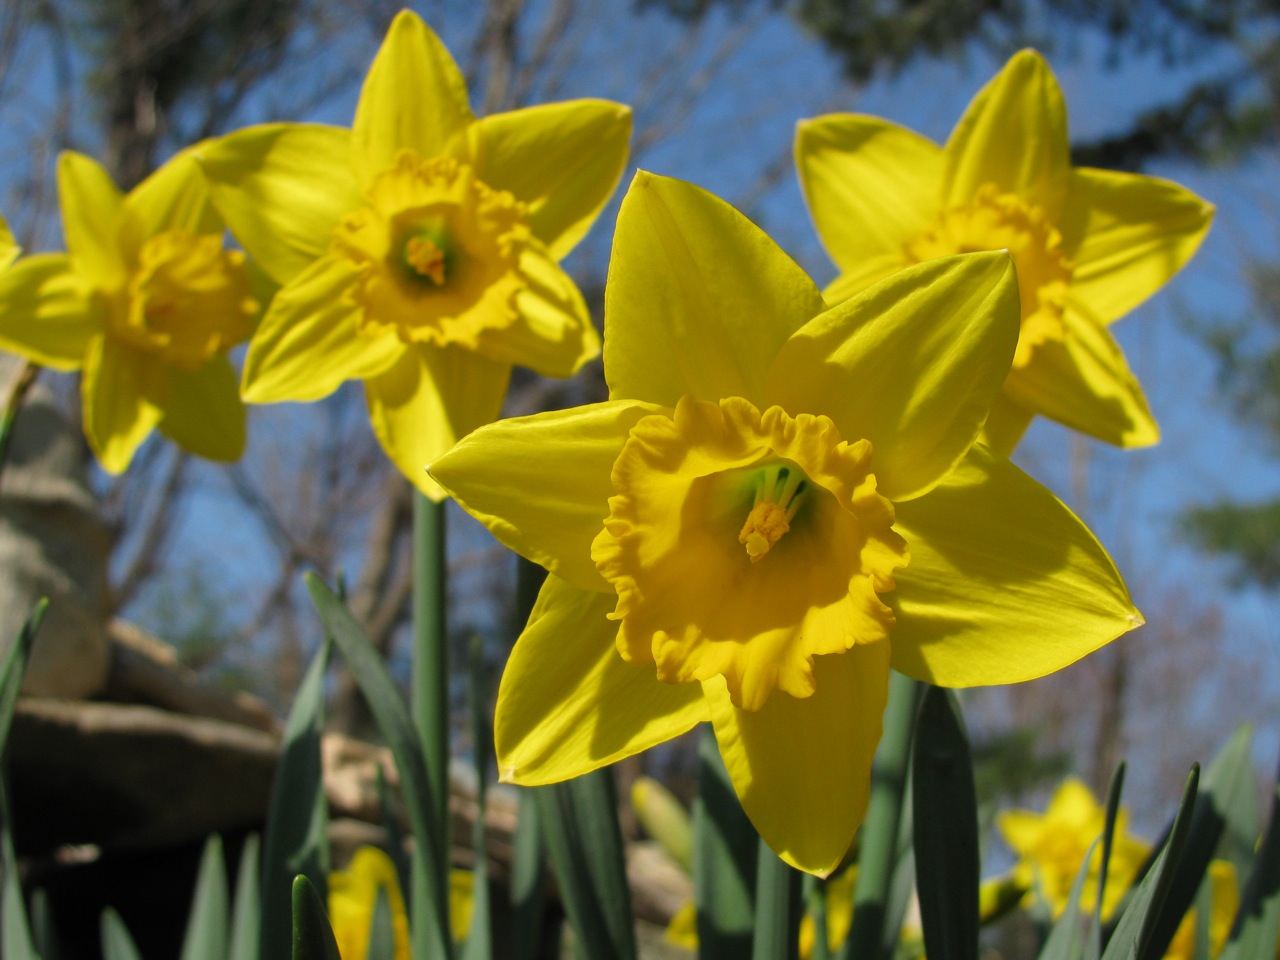 Daffodils in Spring | Pics4Learning